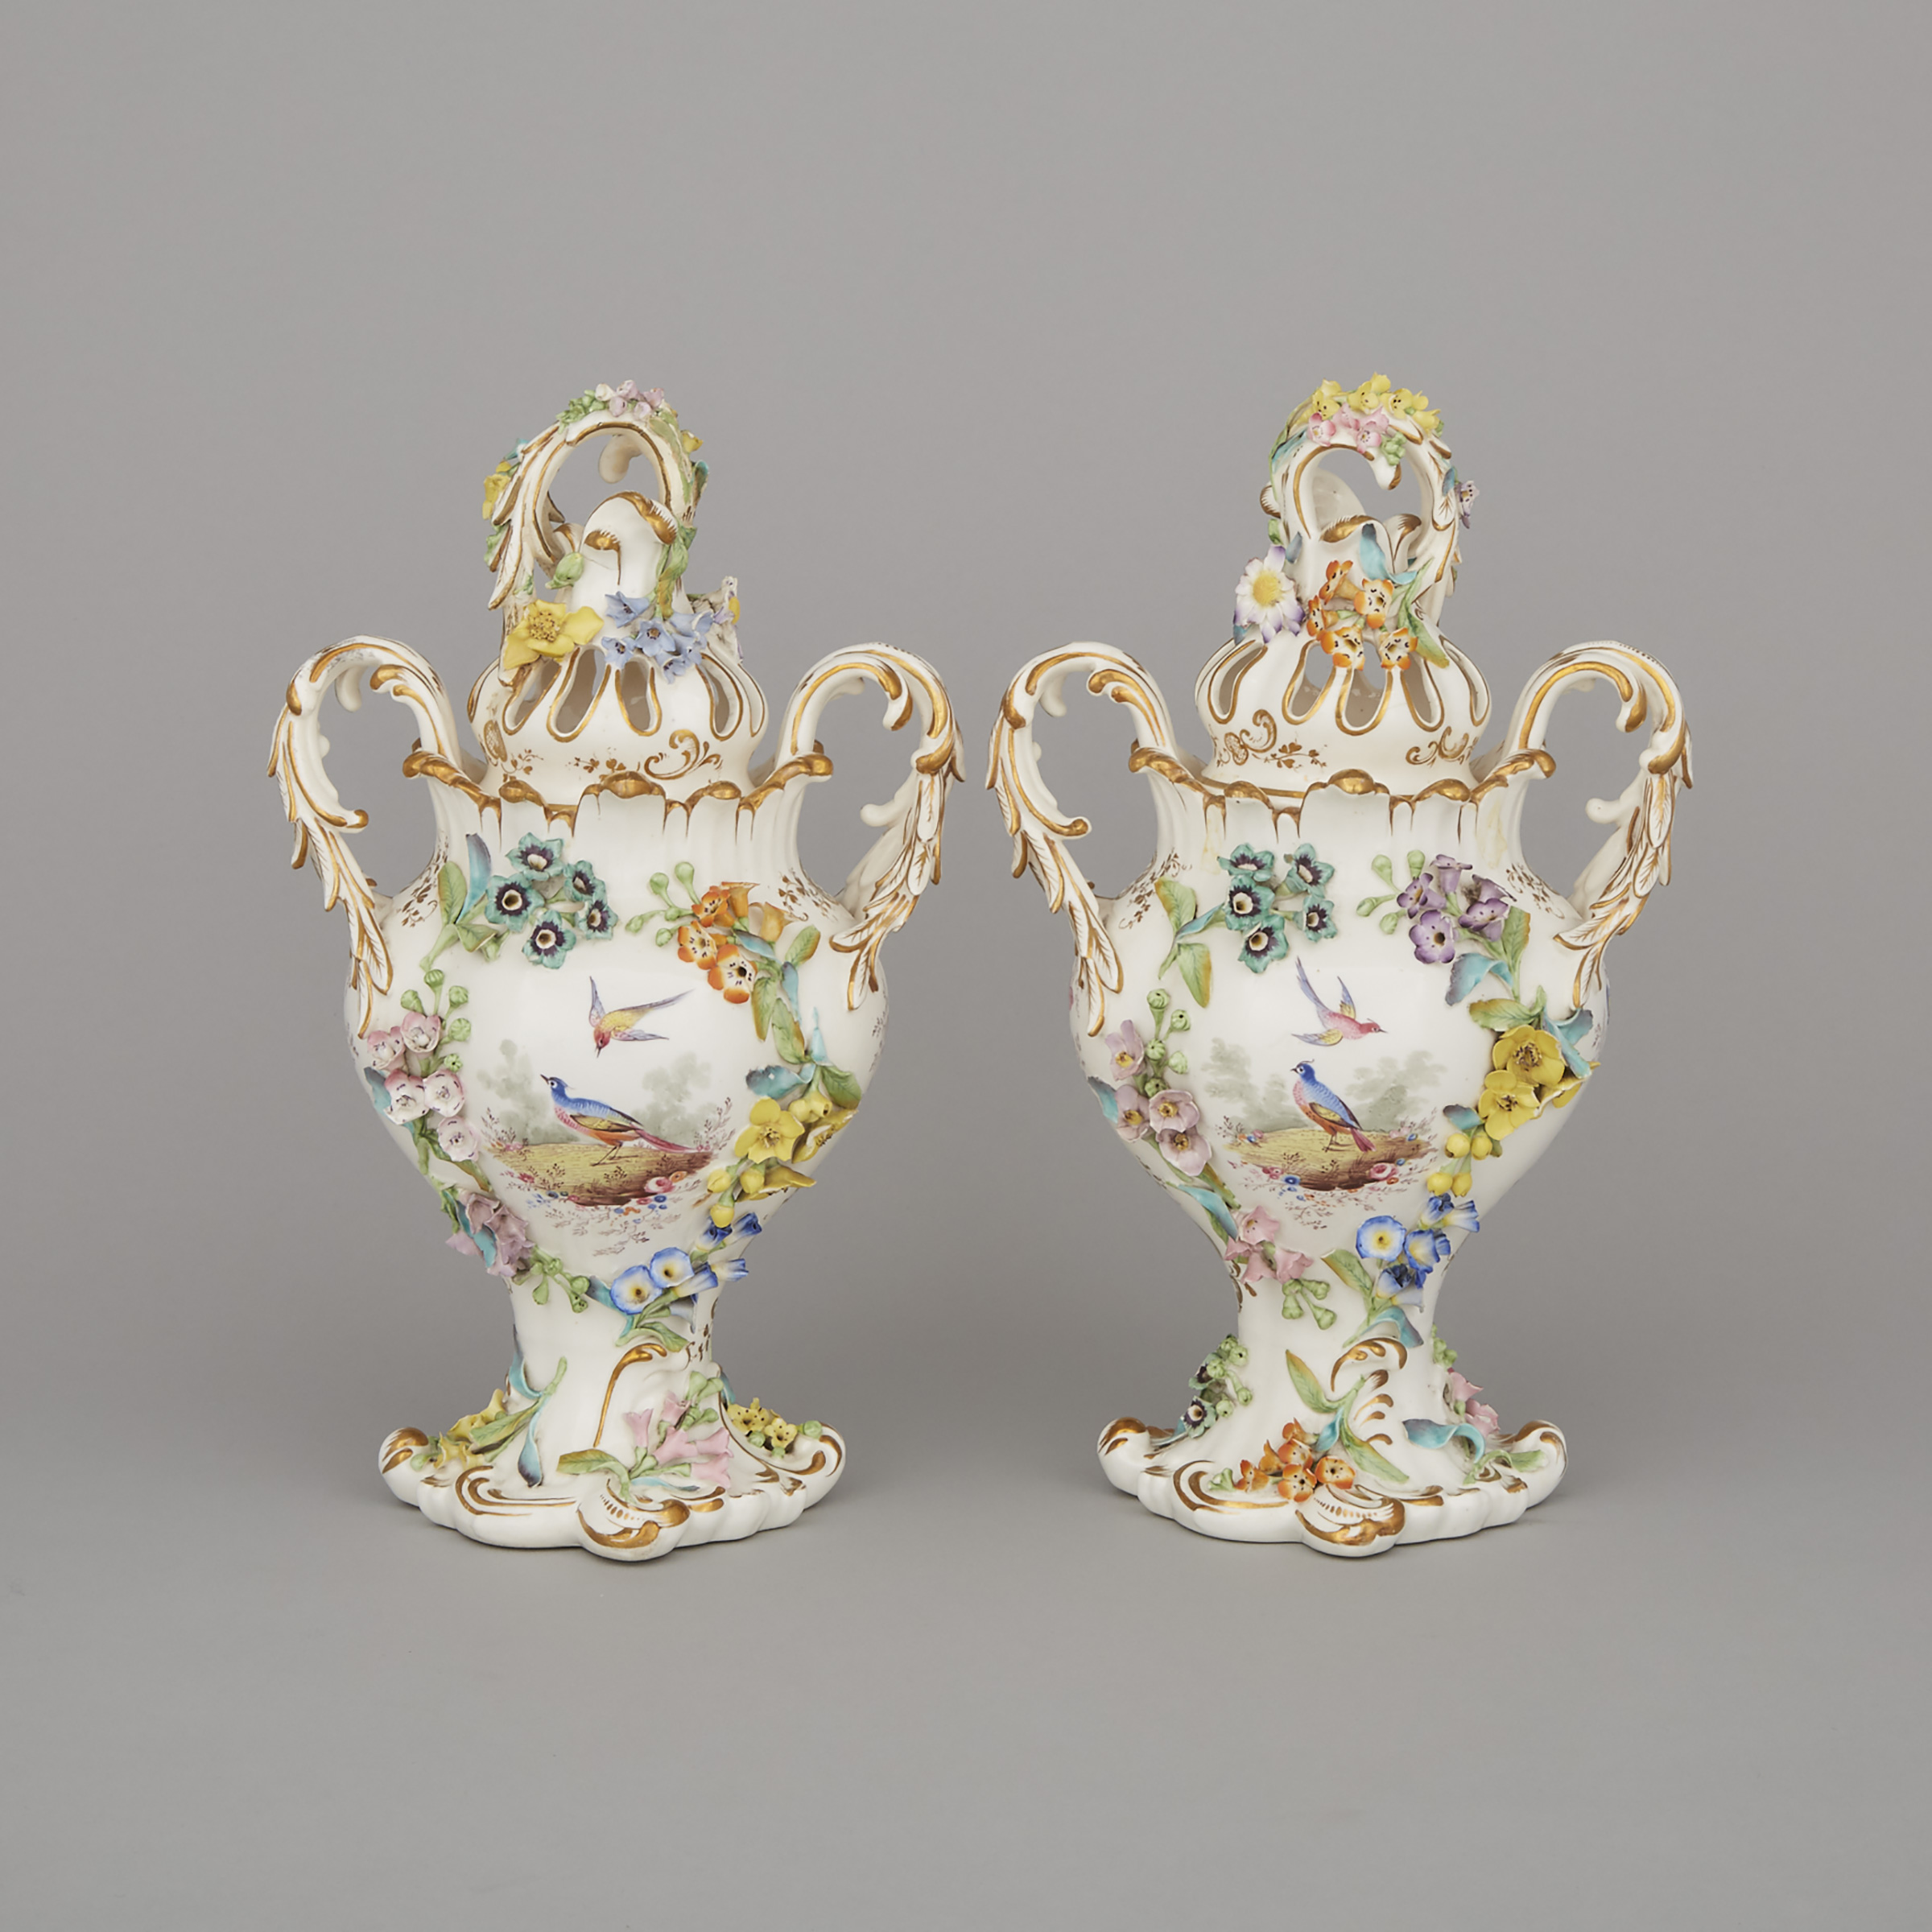 Pair of Coalbrookdale Flower-Encrusted Two-Handled Potpourri Vases and Covers, mid-19th century